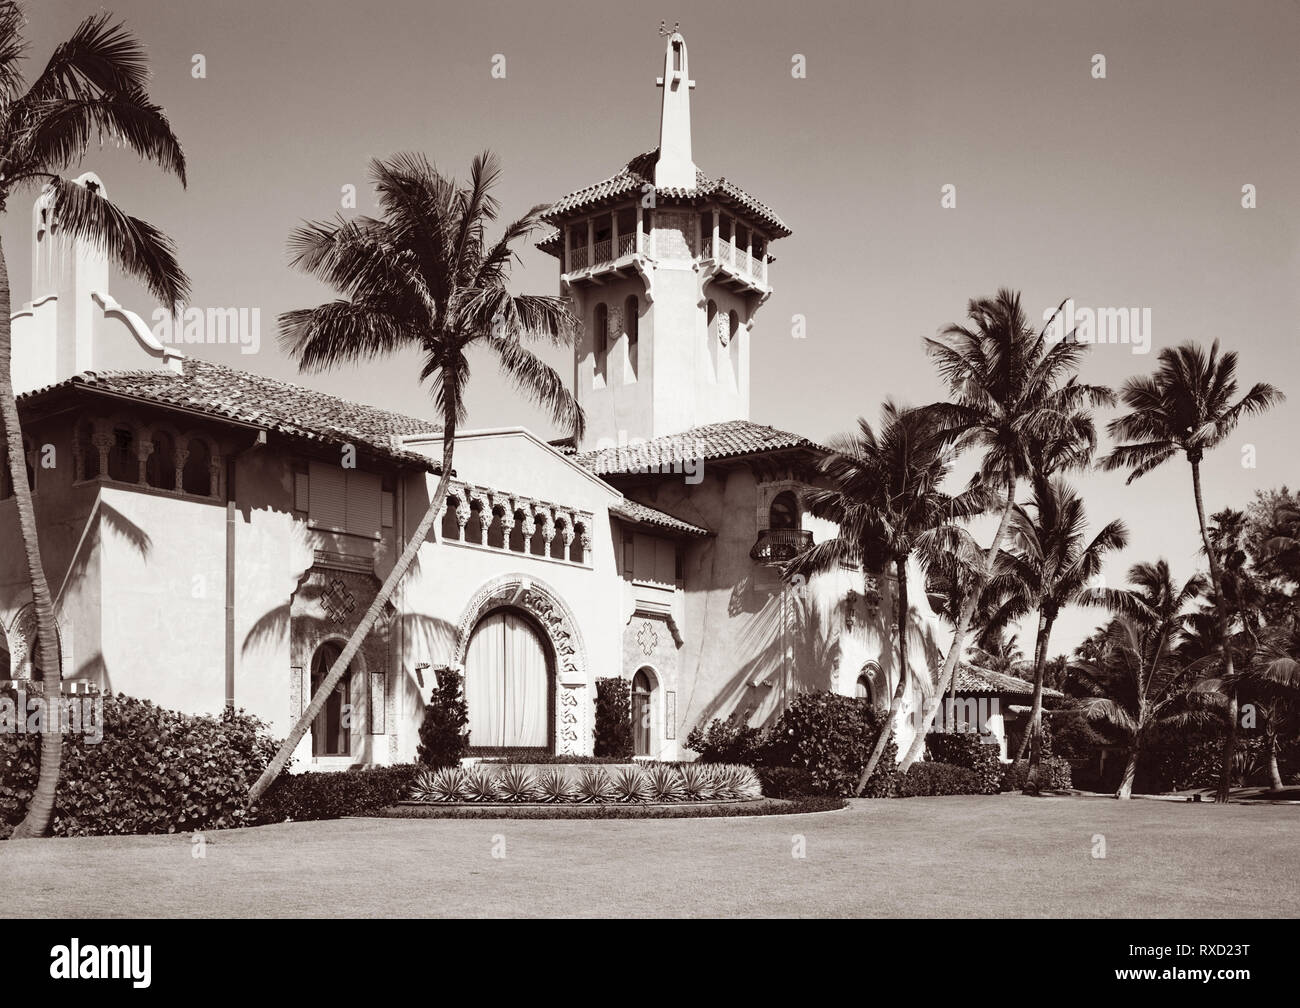 Mar-a-Lago (Spanish for 'Sea-to-Lake') was the former estate of Marjorie Merriweather Post and is the 'Winter White House' and personal residence of US President Donald Trump in Palm Beach, Florida. The 62,500 square-foot home also houses the members-only Mar-a-Lago Club. Built between 1924 and 1927, the estate stretches from the Intracoastal Waterway (Lake Worth) to the Atlantic Ocean on the barrier island of Palm Beach. Stock Photo